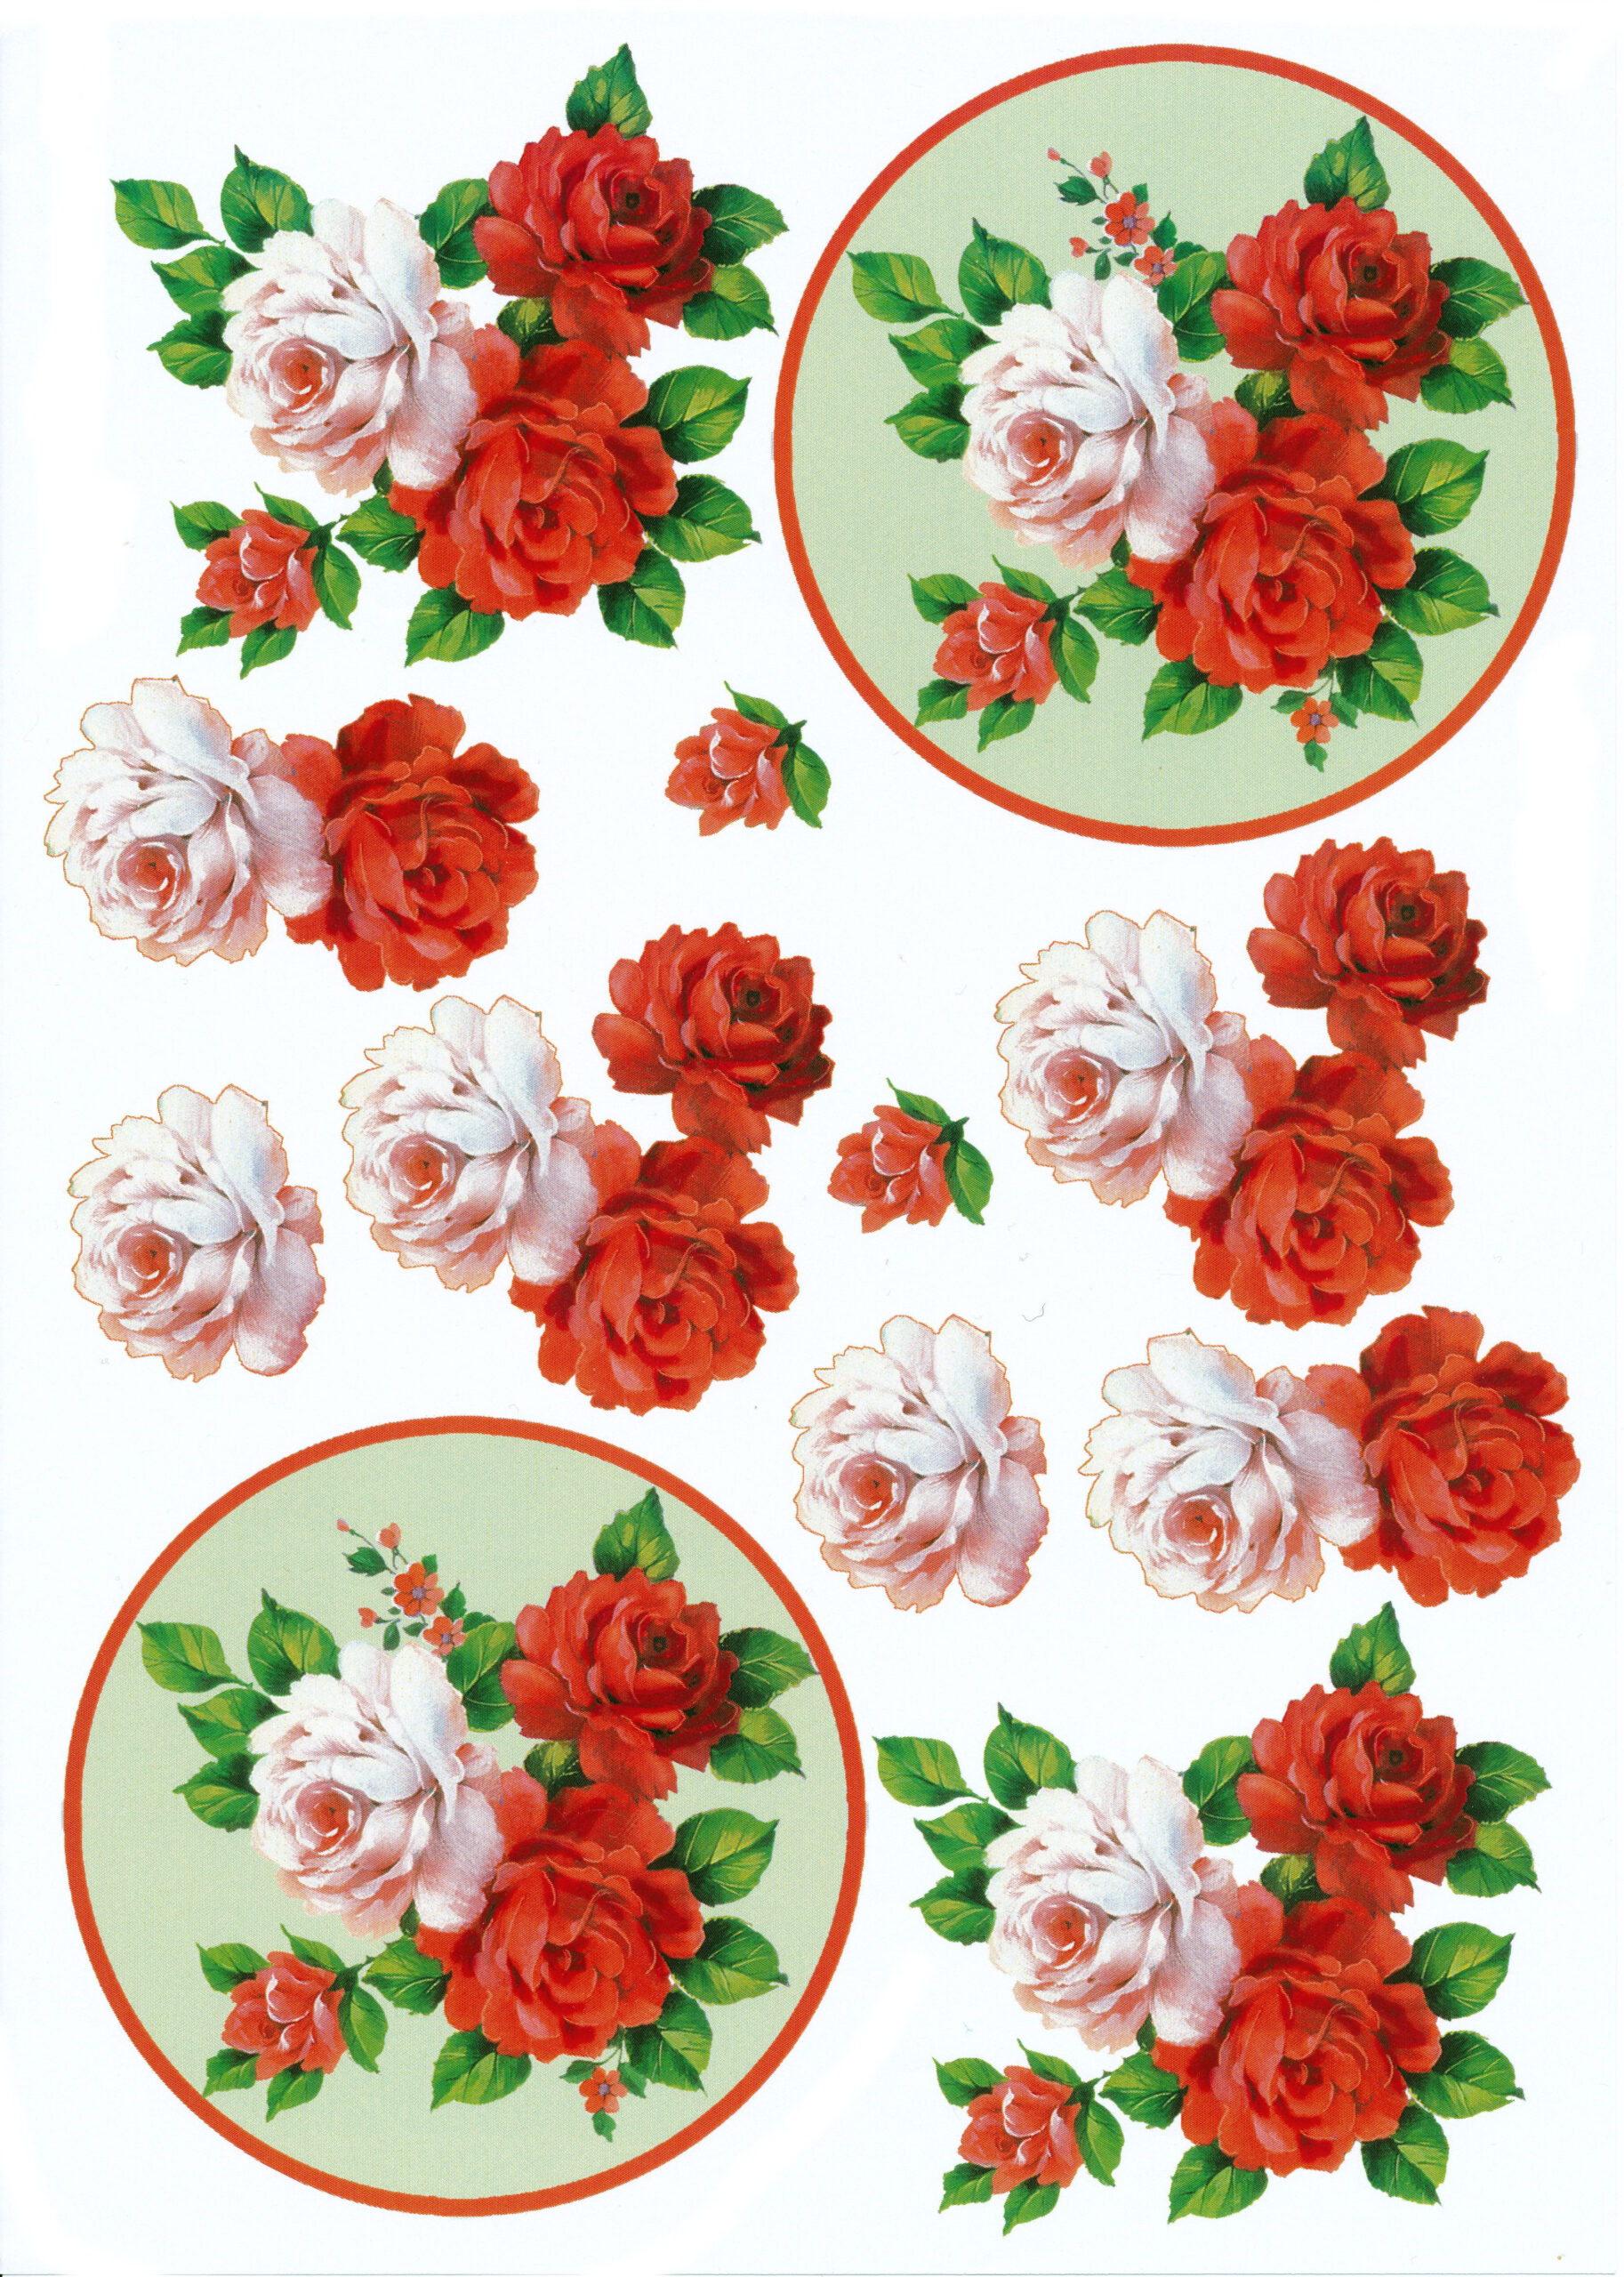 Vintage Roses Decoupage Card Templates in Free Printable Decoupage Flowers